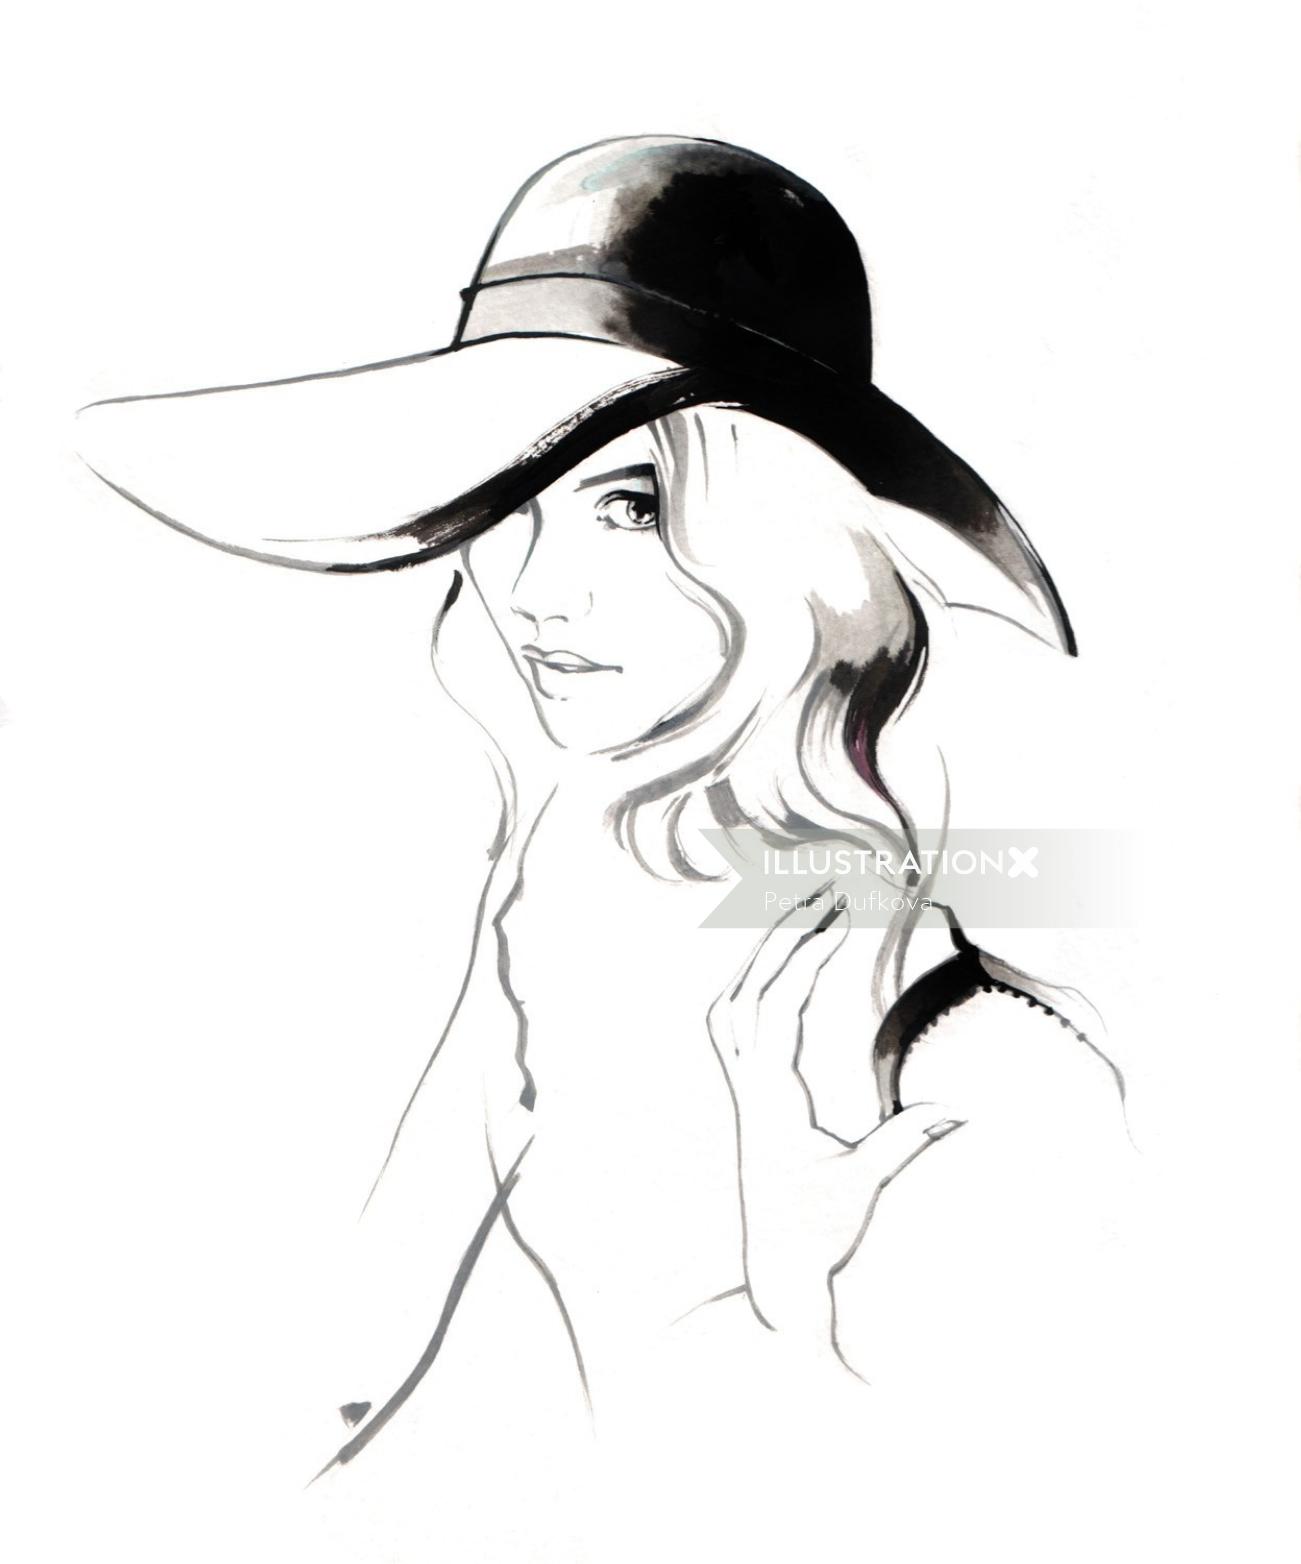 Fashion illustration of woman with hat
